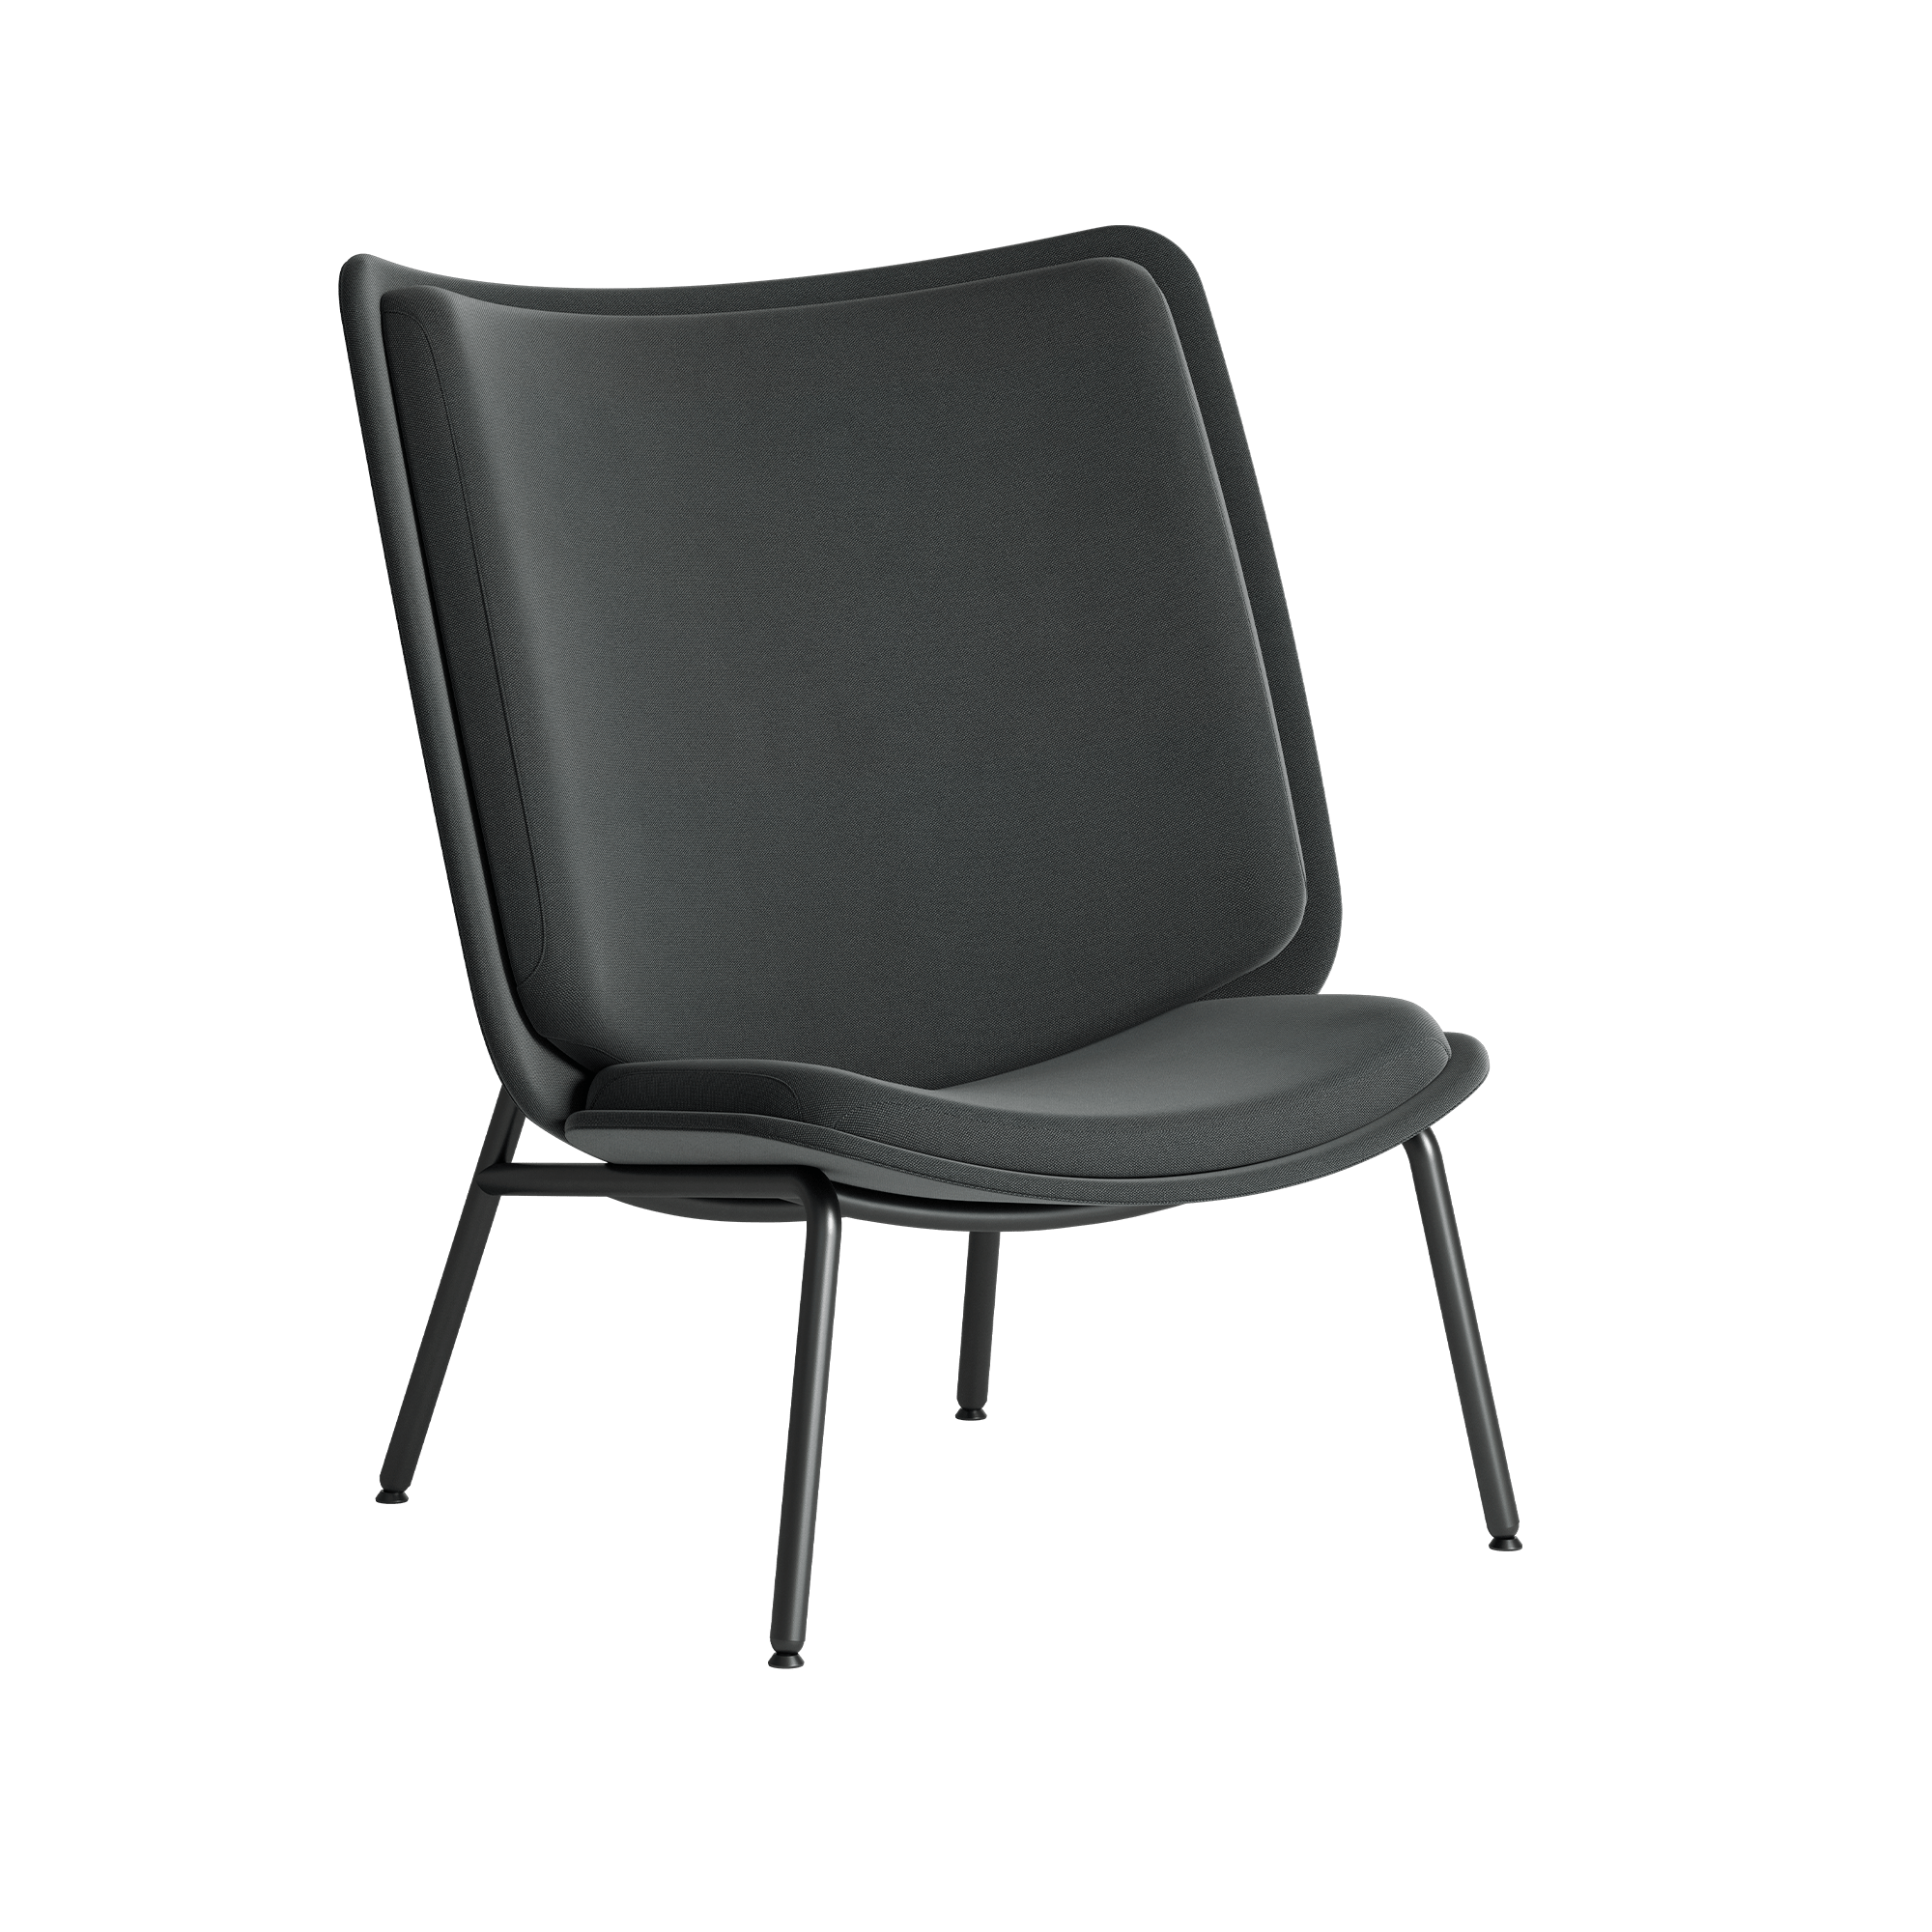 A black lounge chair on a black background.